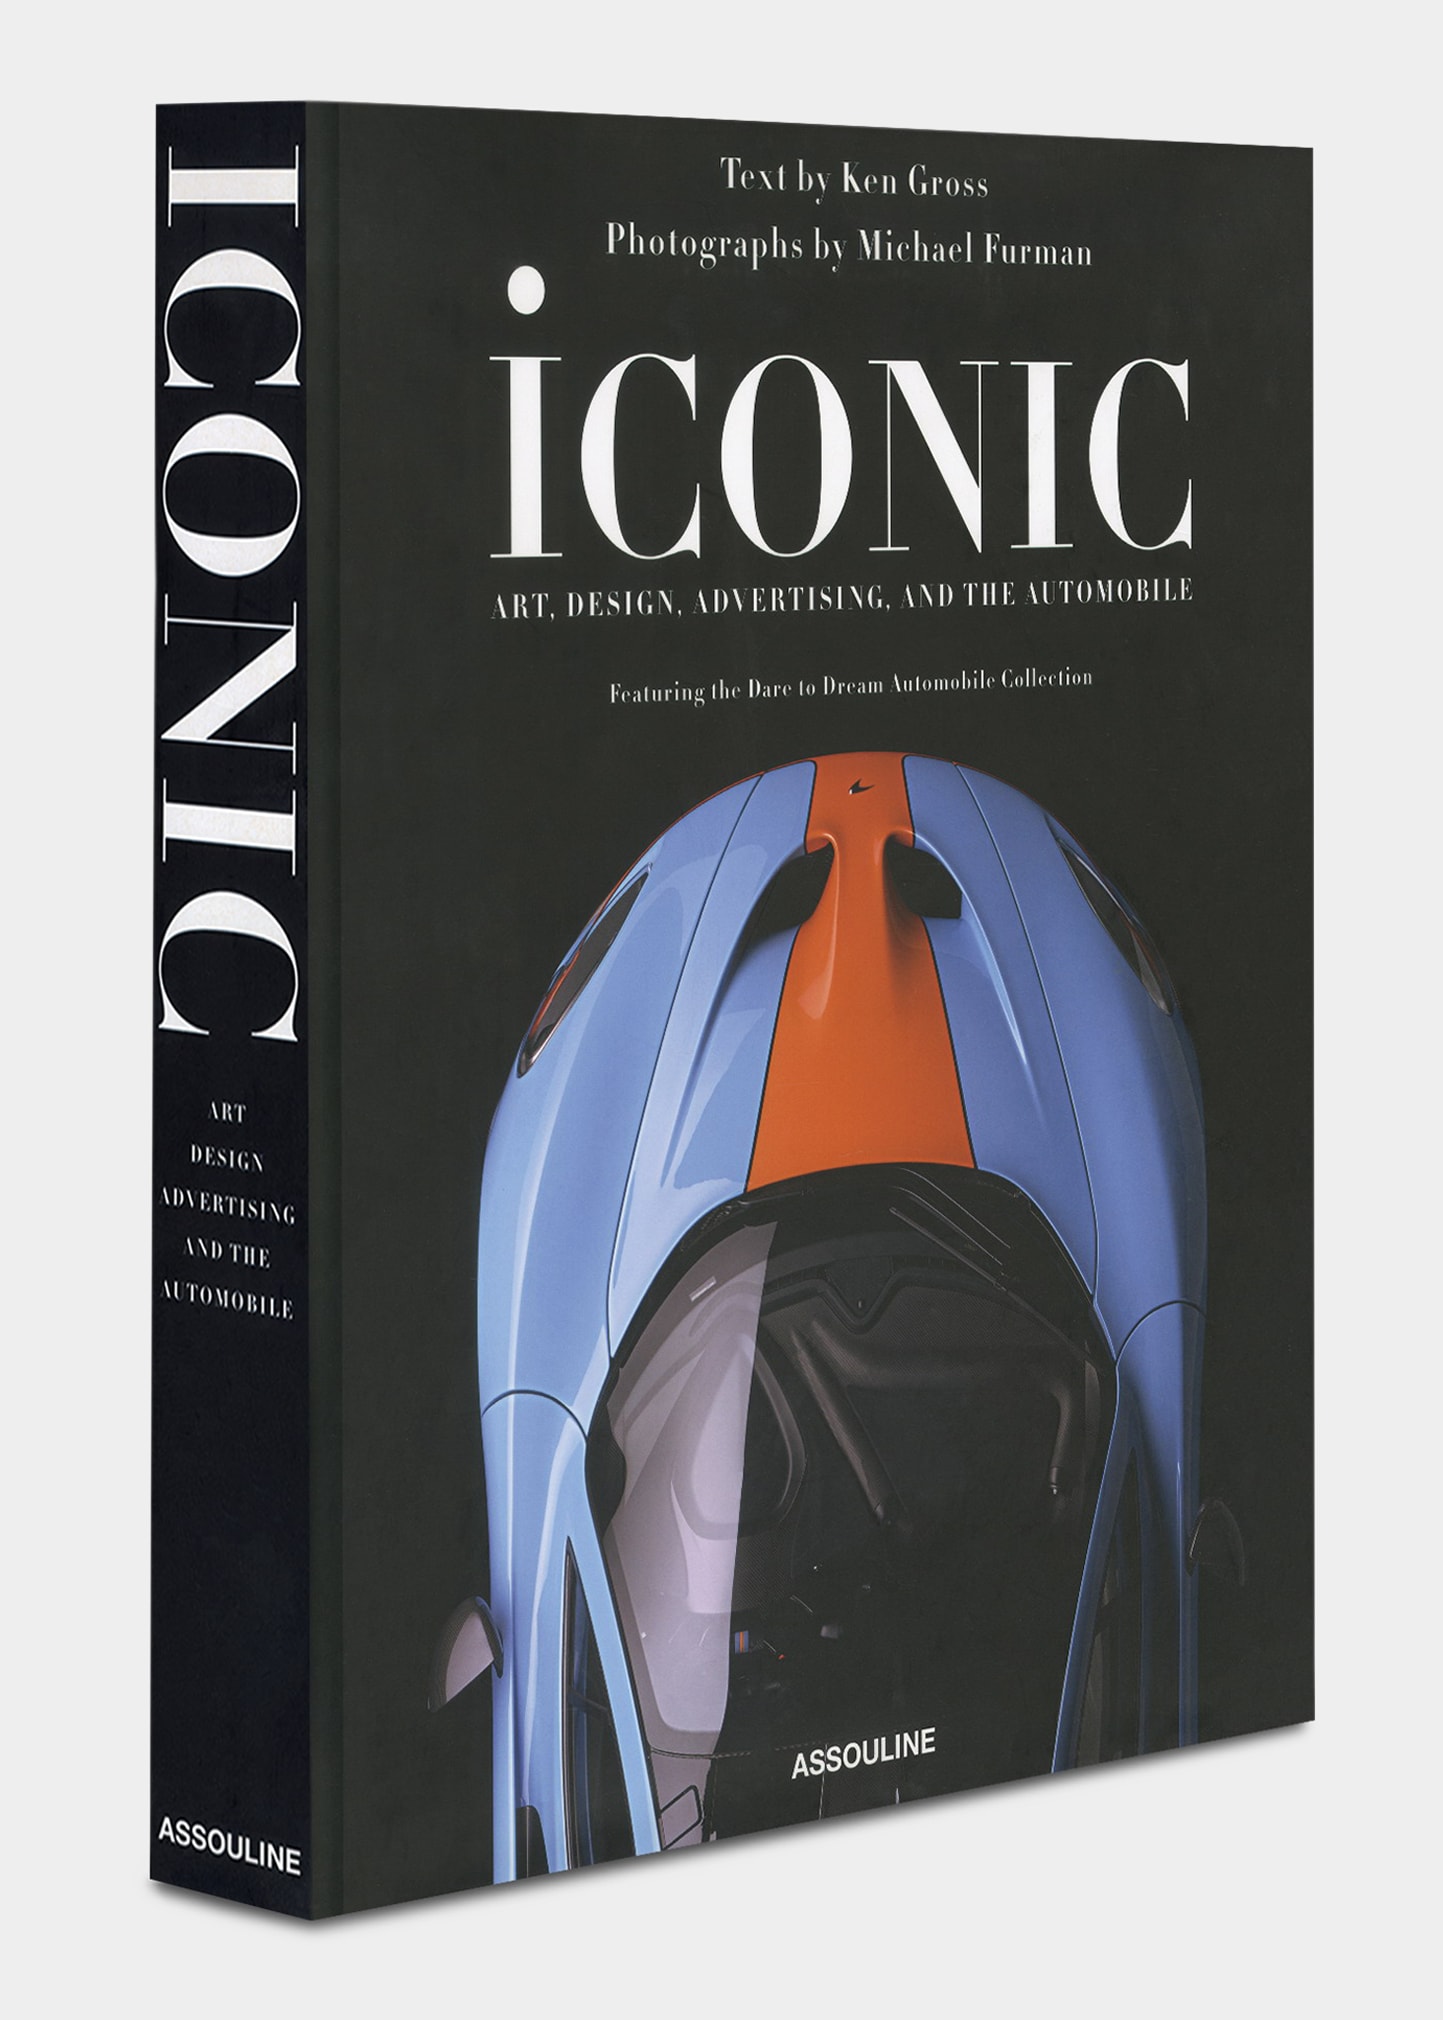 Iconic: Art, Design, Advertising, and the Automobile Book by Miles S. Nadal and Ken Gross